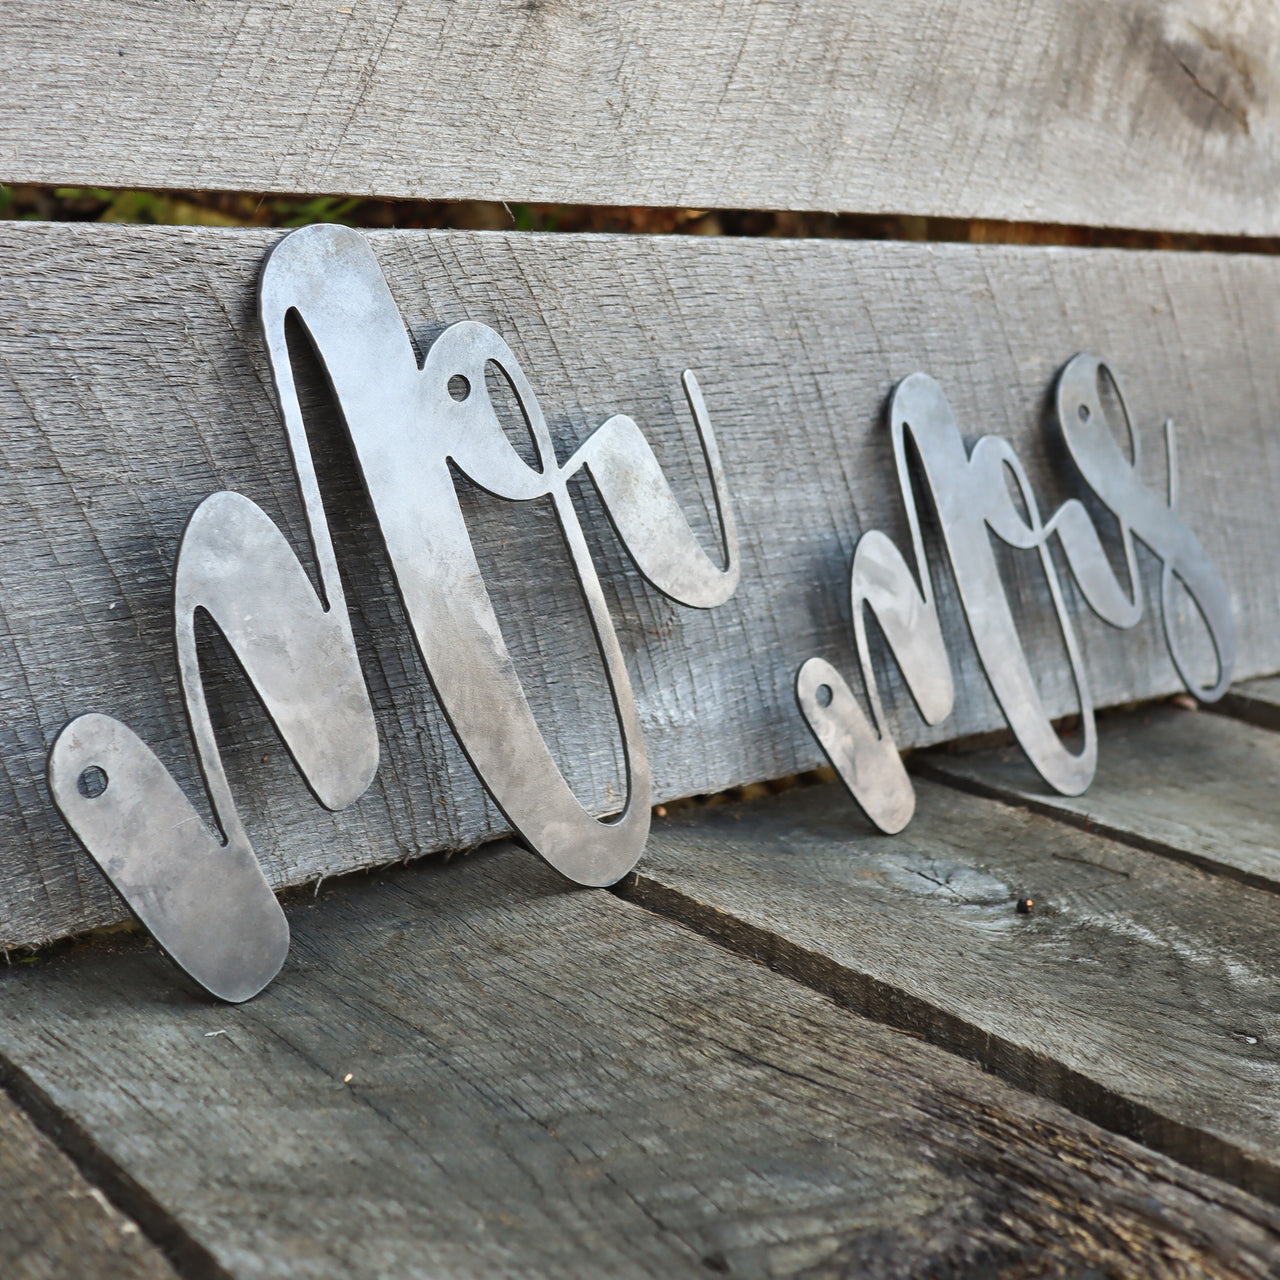 Mr and Mrs Wedding Chair Signs - Metal Chair Back Decorations - Bride and Groom Decor